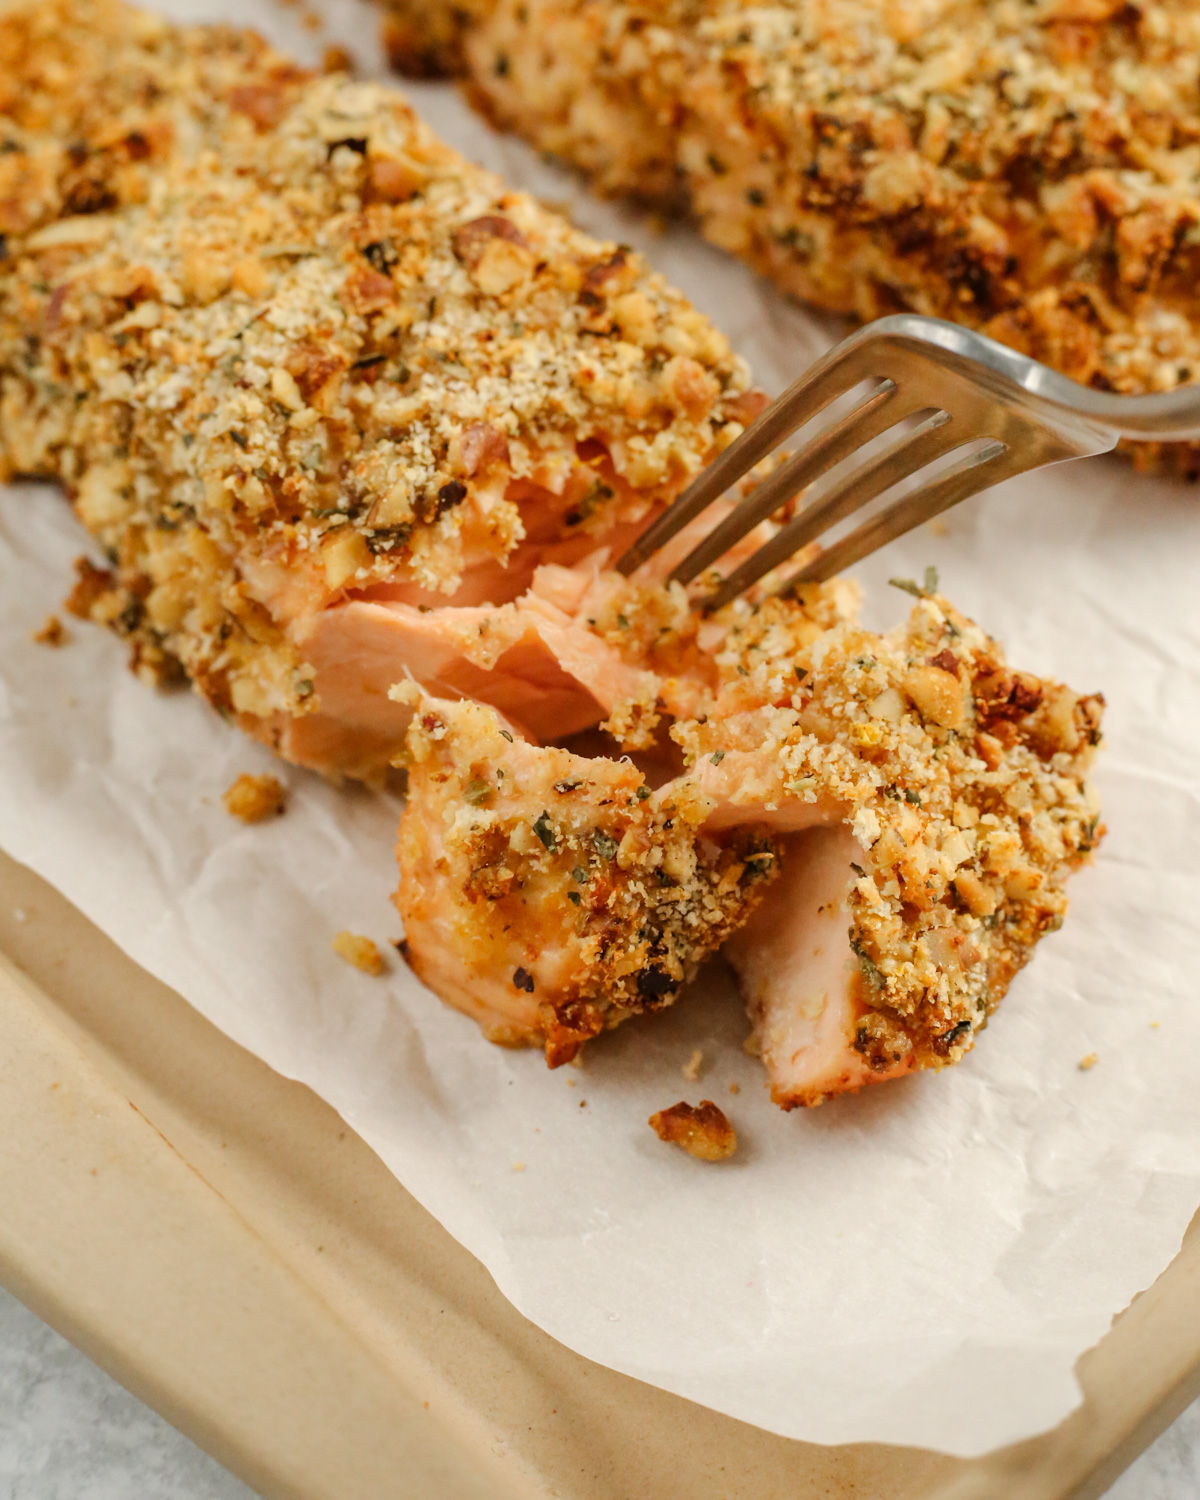 A silver fork prods a cooked fillet of salmon that is crusted with a walnut-breadcrumb mixture. The salmon flakes apart easily on the sheet pan, indicating it is perfectly cooked and ready to serve